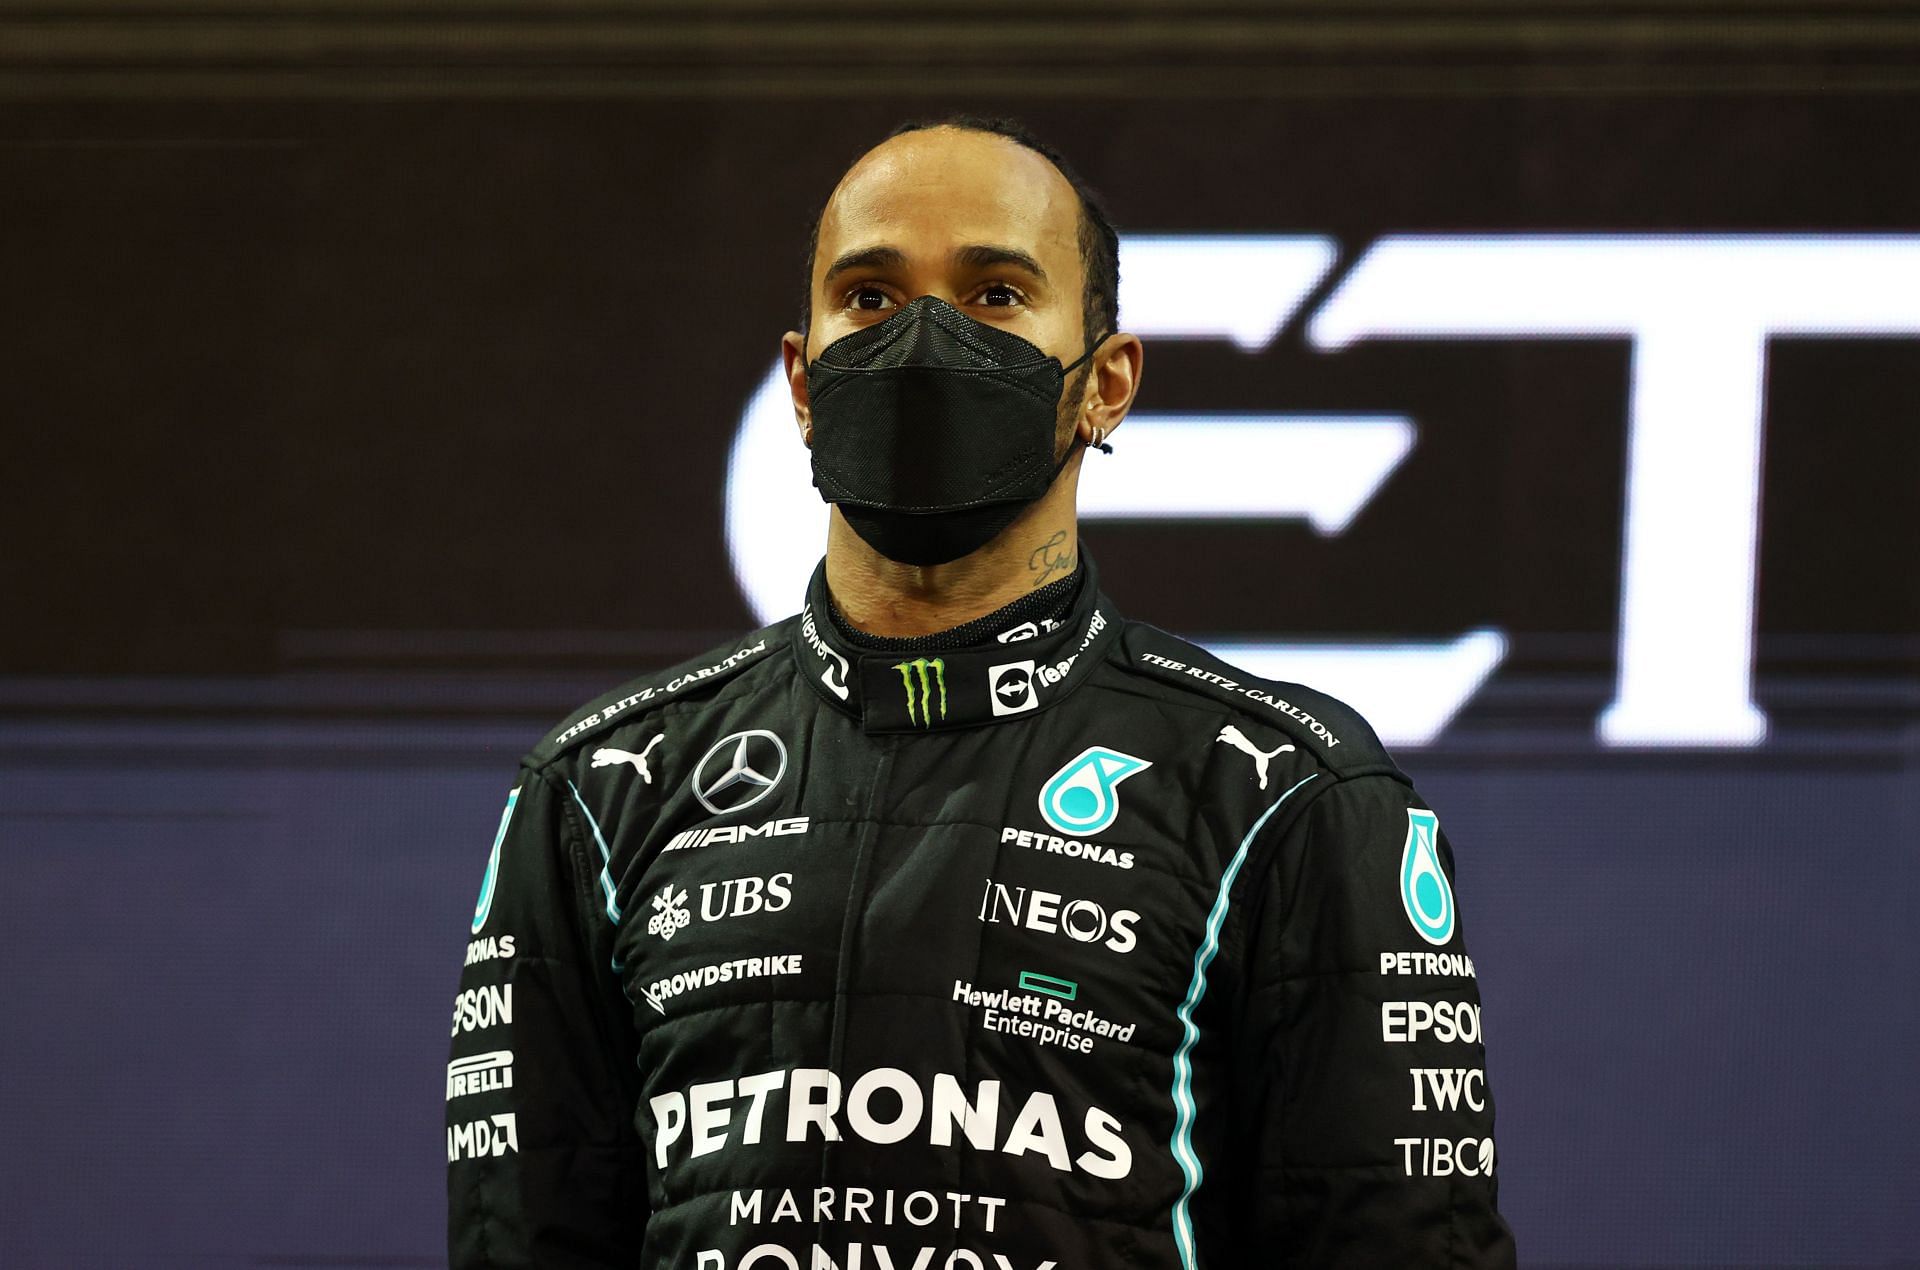 Lewis Hamilton on the podium after the 2021 Abu Dhabi Grand Prix (Photo by Bryn Lennon/Getty Images)